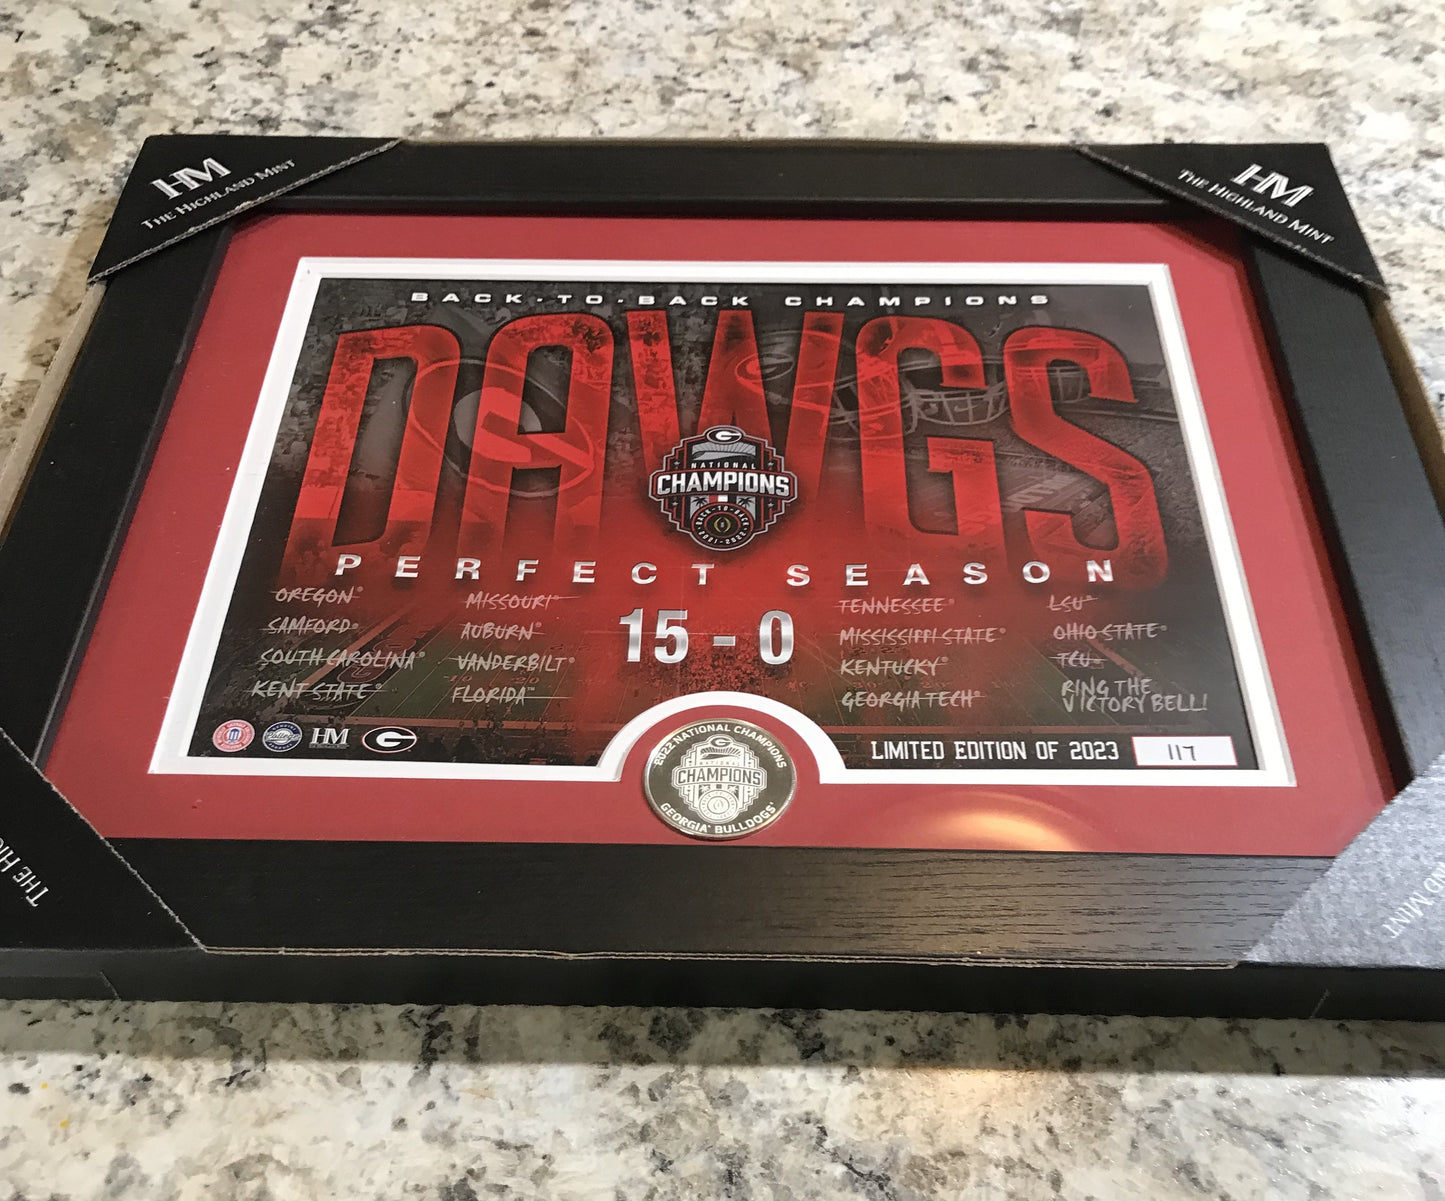 DAWGS Perfect Season coined framed picture